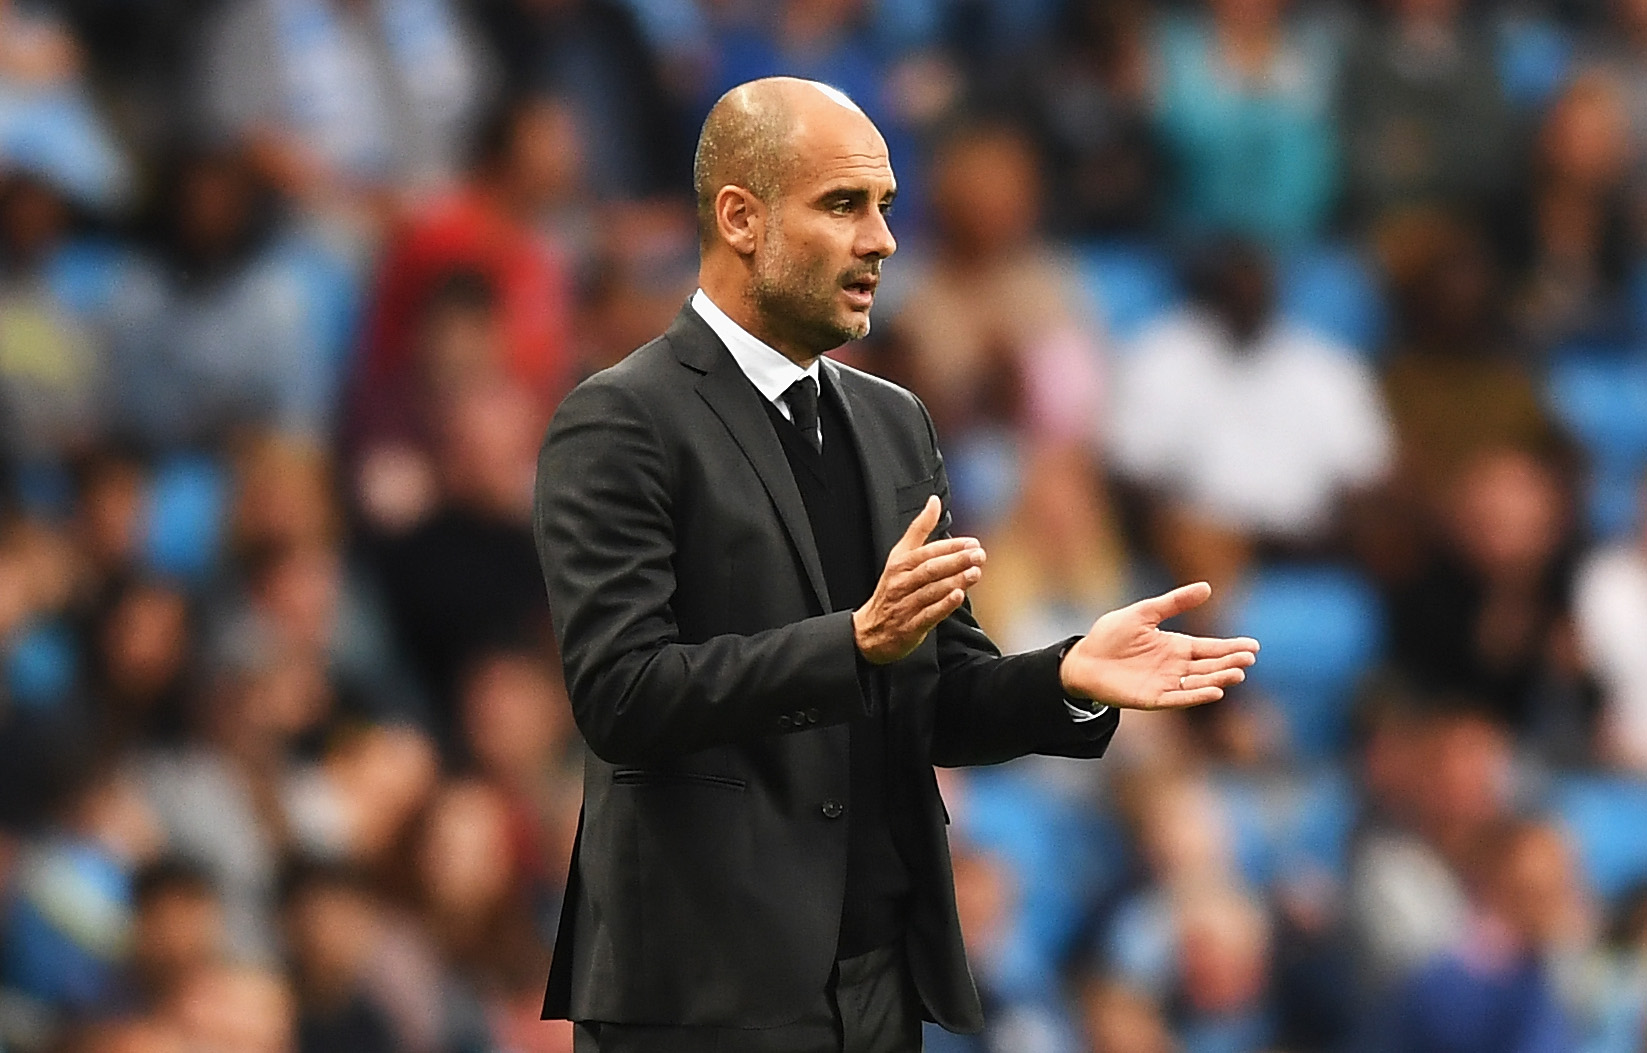 Does Pep Guardiola deserve credit for managing only top clubs?